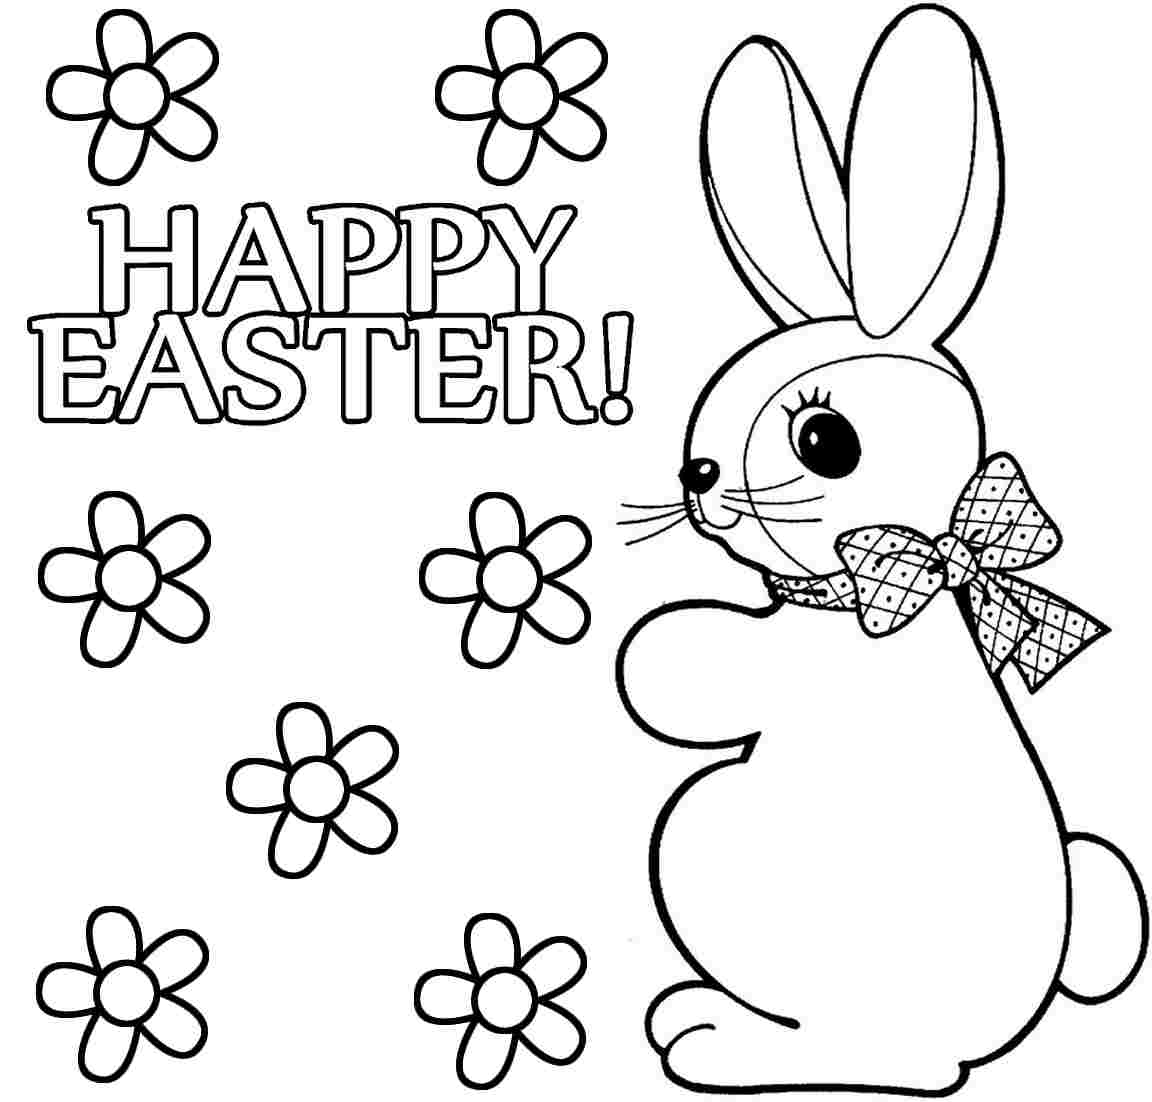 Free Easter Bunny Coloring Pages at GetDrawings | Free download